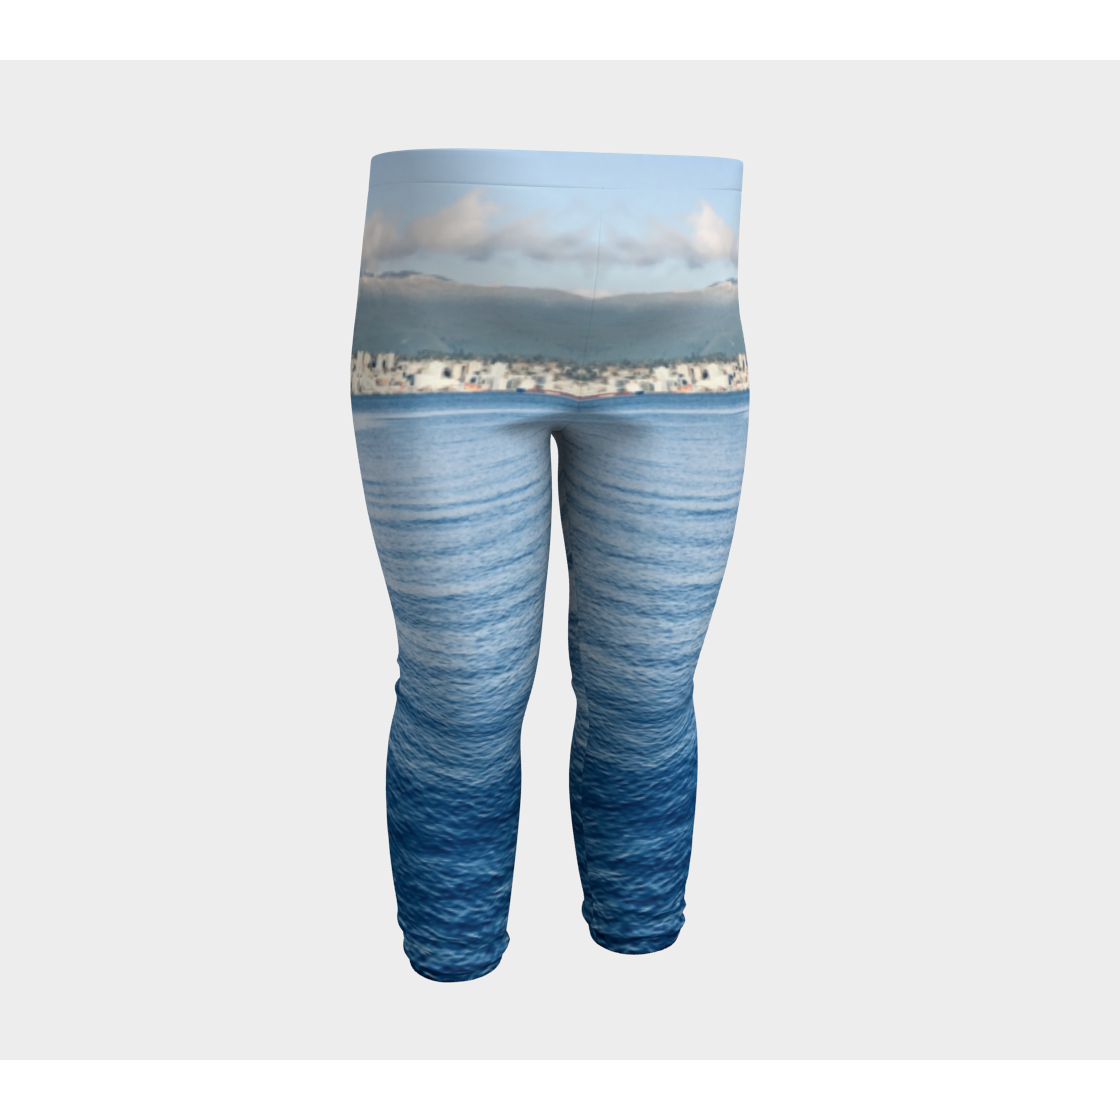 Baby Leggings for Children with: Ocean City Design, Front, 2 years